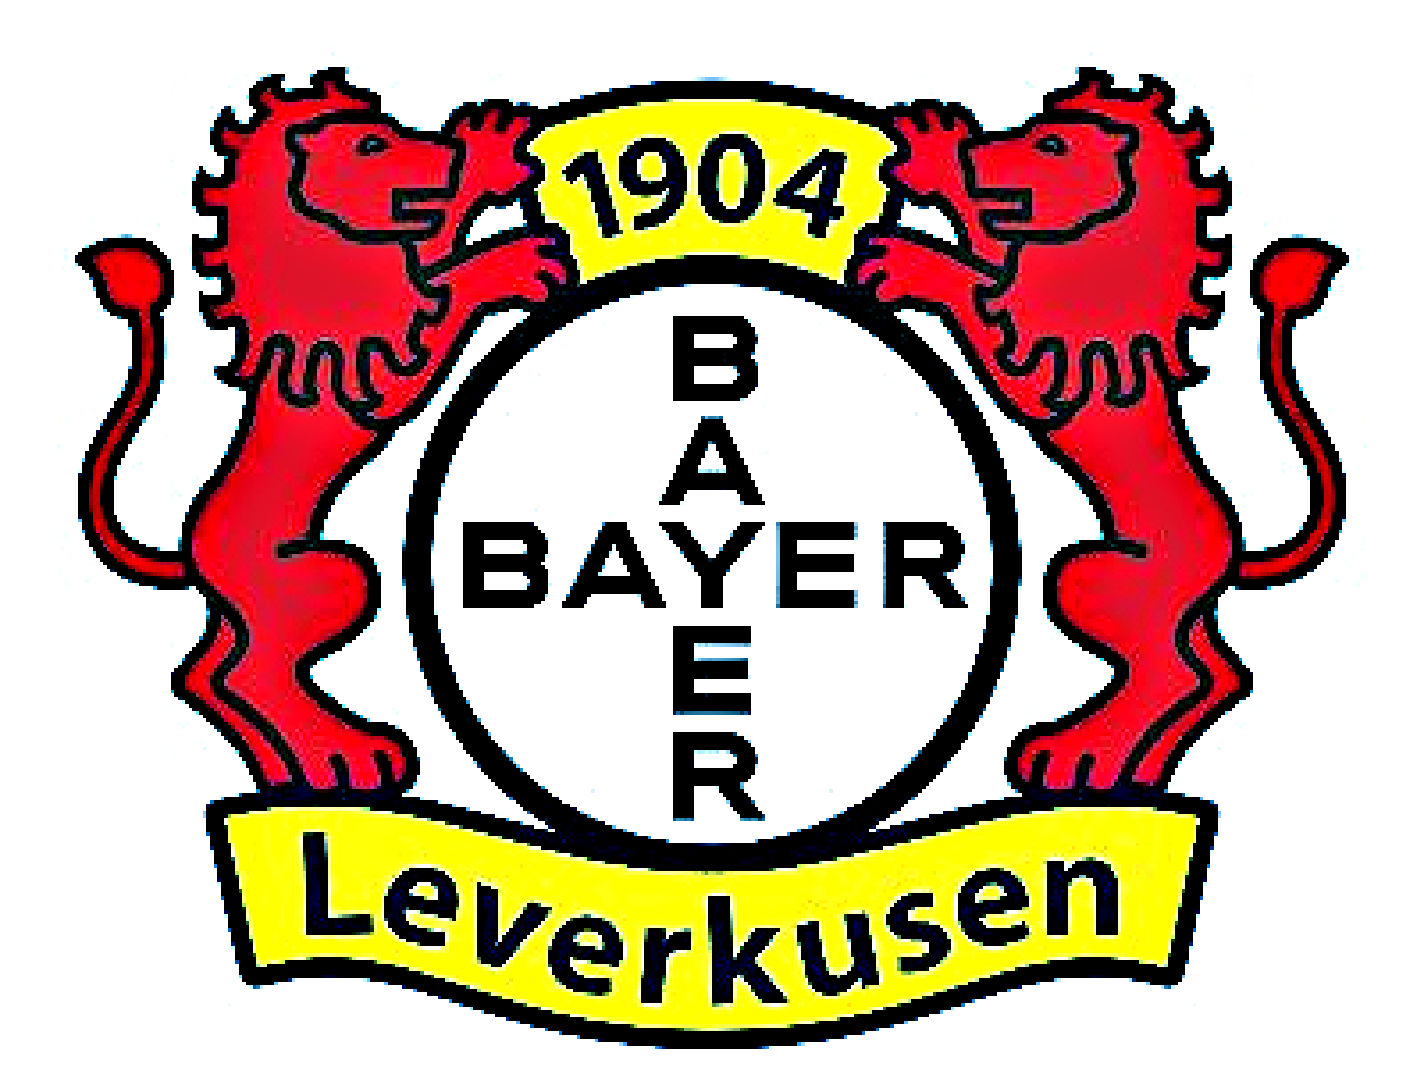 Bayer Leverkusen Twitter account offers brilliant response to ‘Bayern buys all your best players’ jab